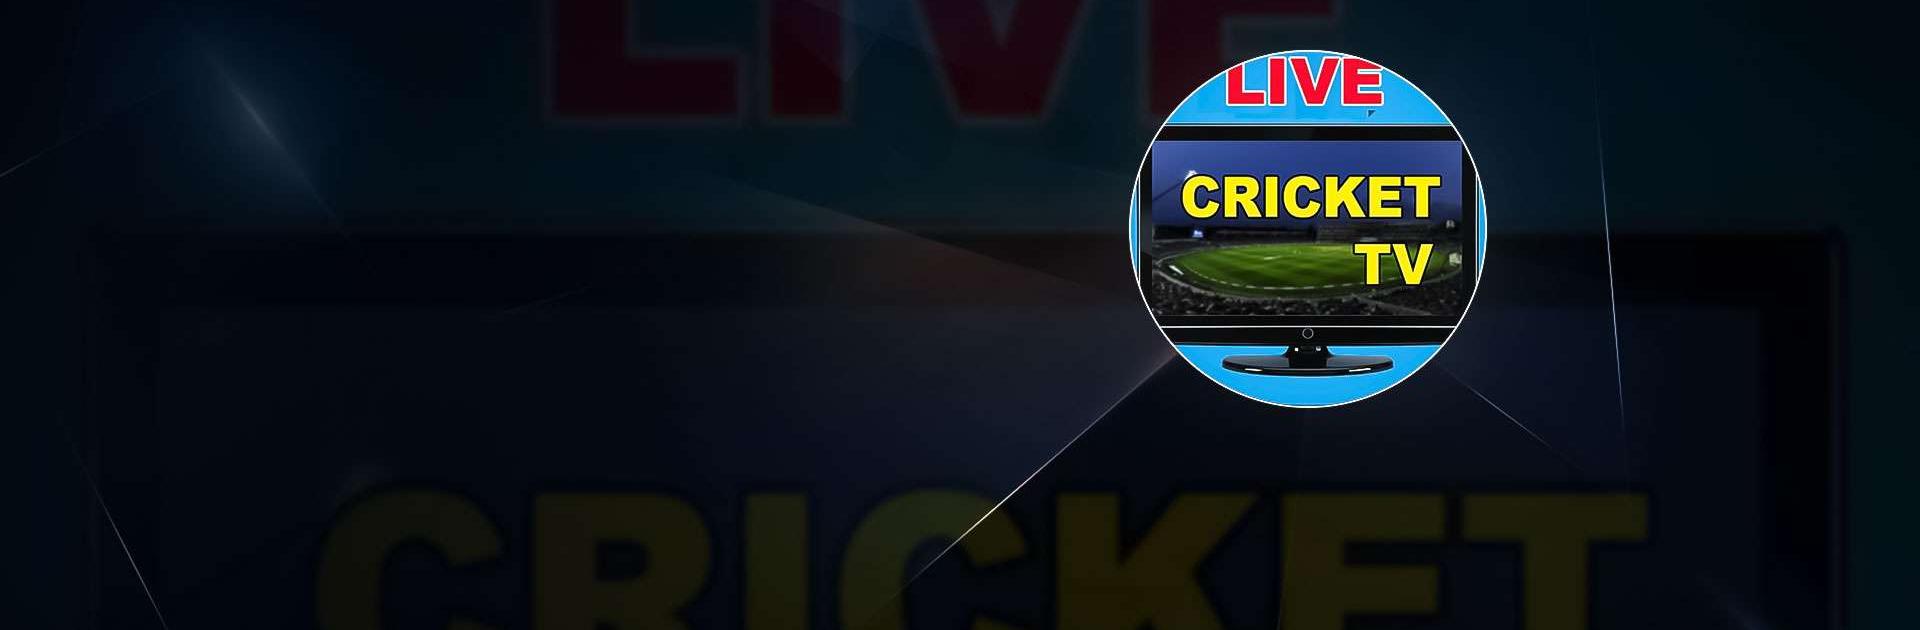 Download and Use Live Cricket TV Live Scores on PC & Mac (Emulator)